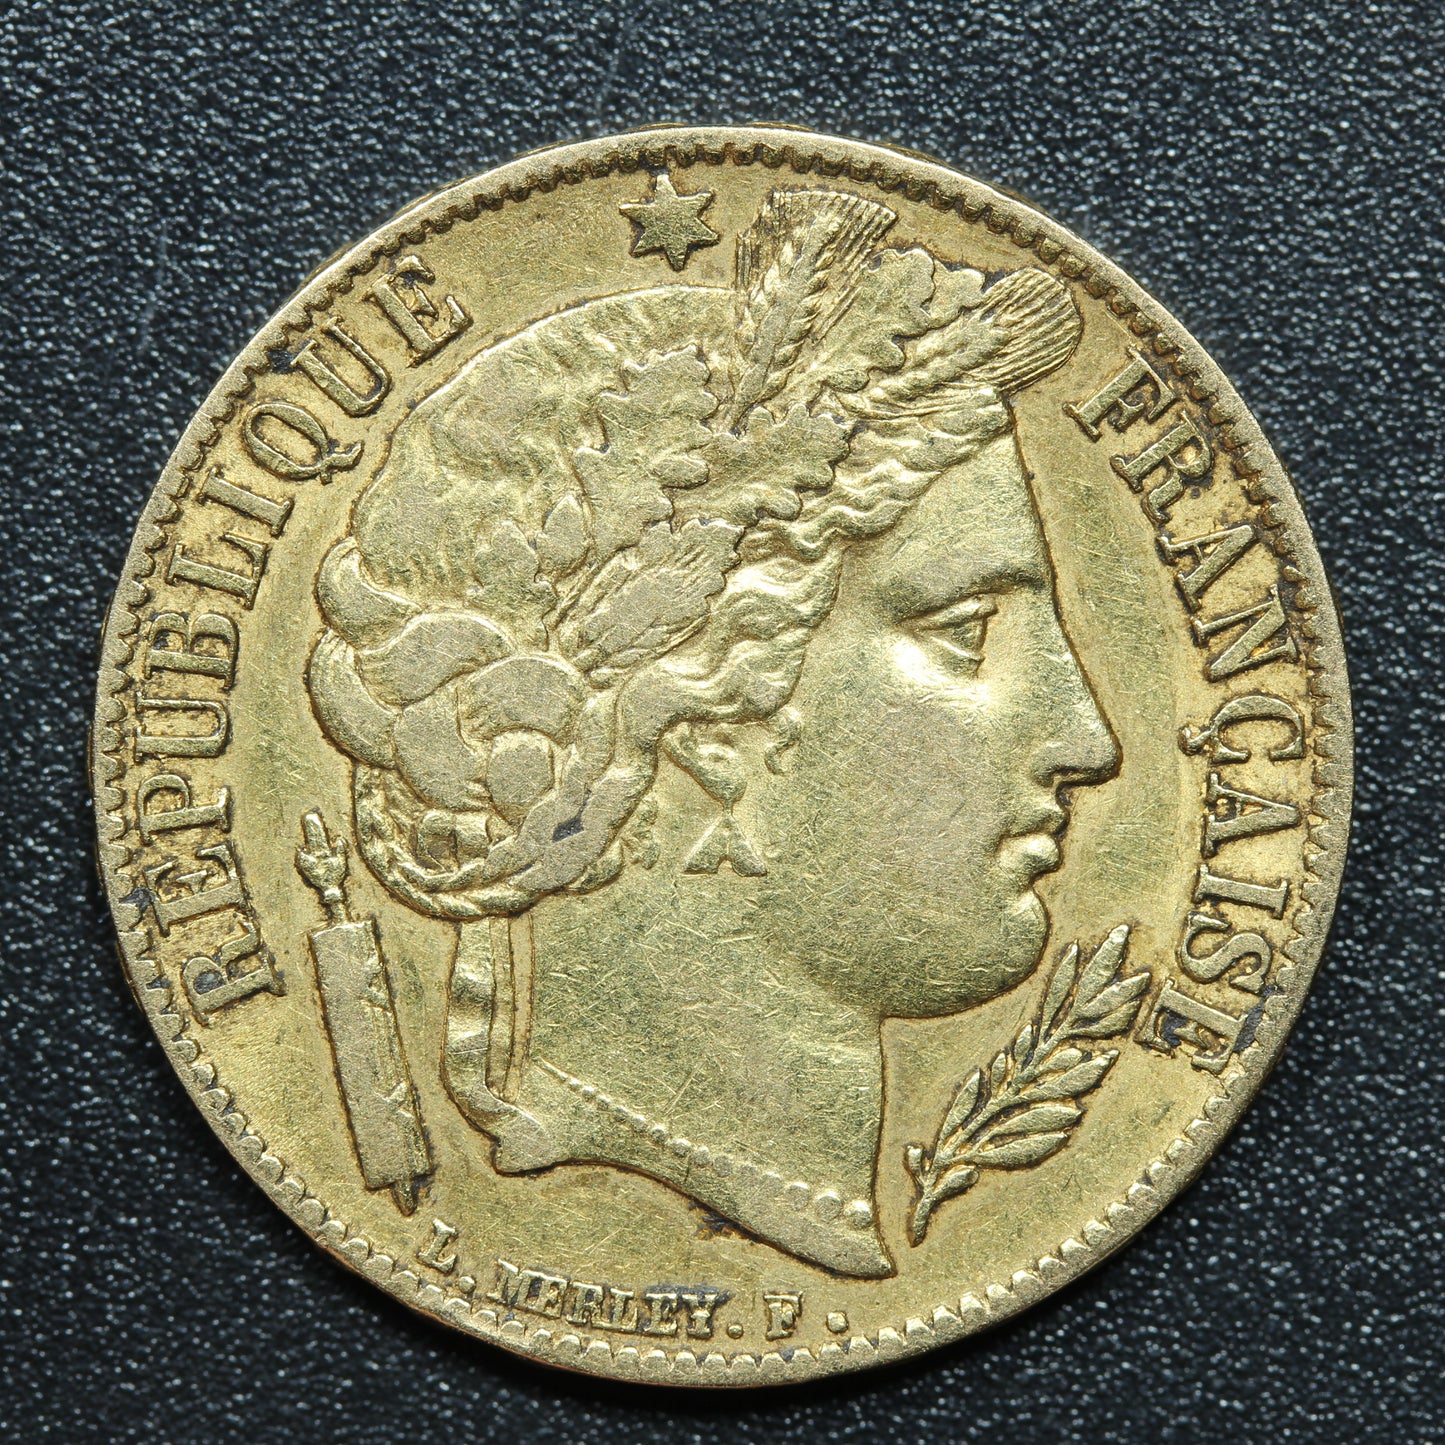 1851 A French Gold 20 Francs Liberty Head - KM#762